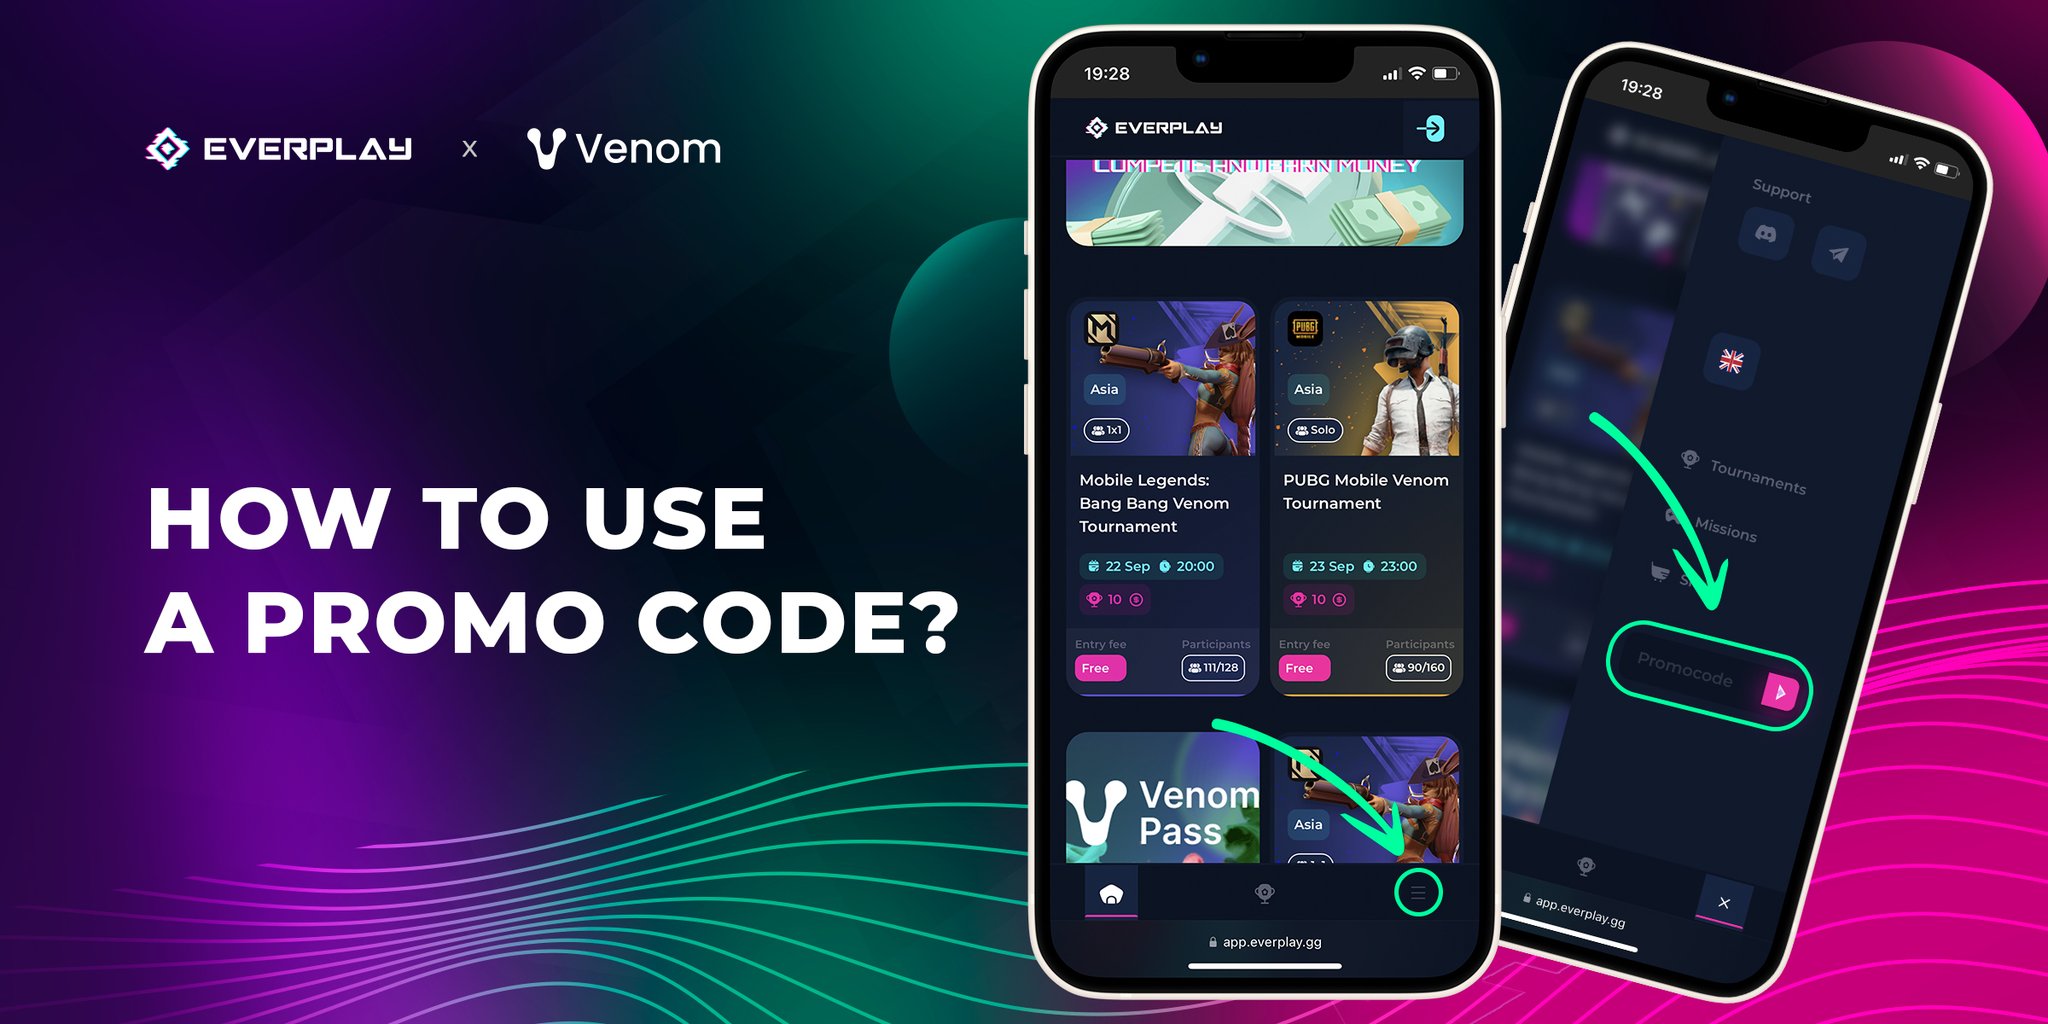 EVERPLAY on X: How to use a promo code? We've made it simple for you 😉 ⚡️  For mobile users: If you're using the mobile version, you can find the  promo code